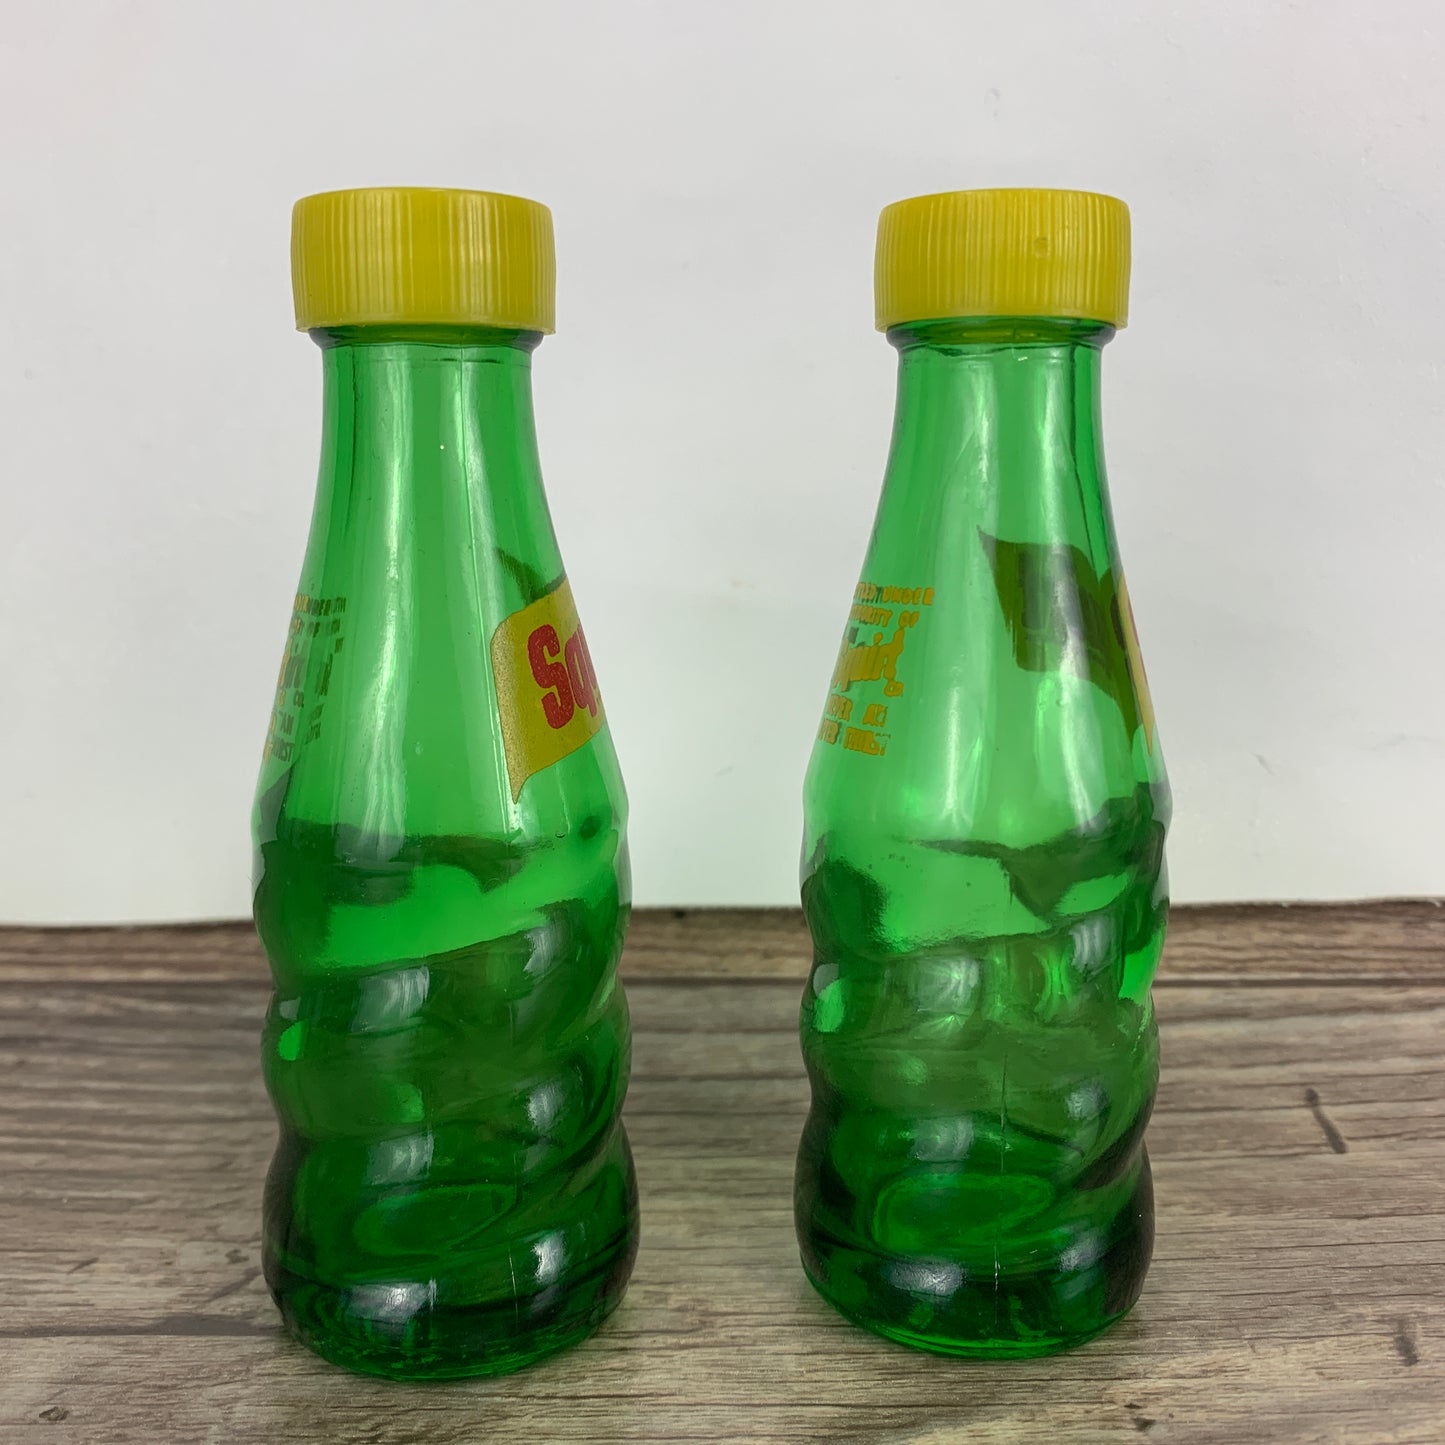 Squirt Pop Bottle Salt and Pepper Shakers, Vintage Green Pop Bottle Salt & Pepper Shakers